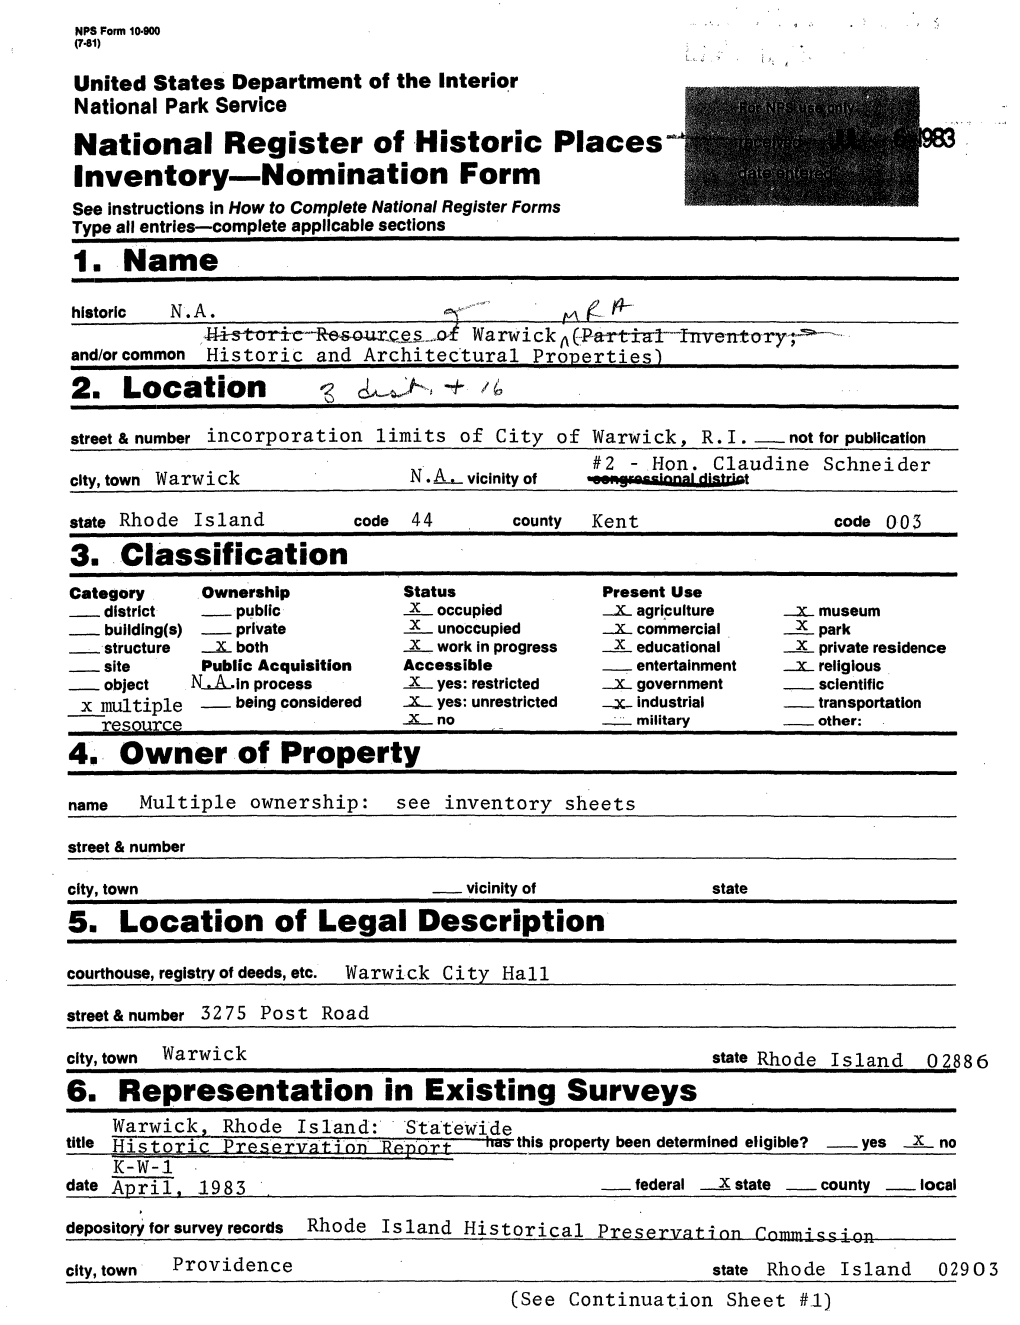 4. Owner of Property